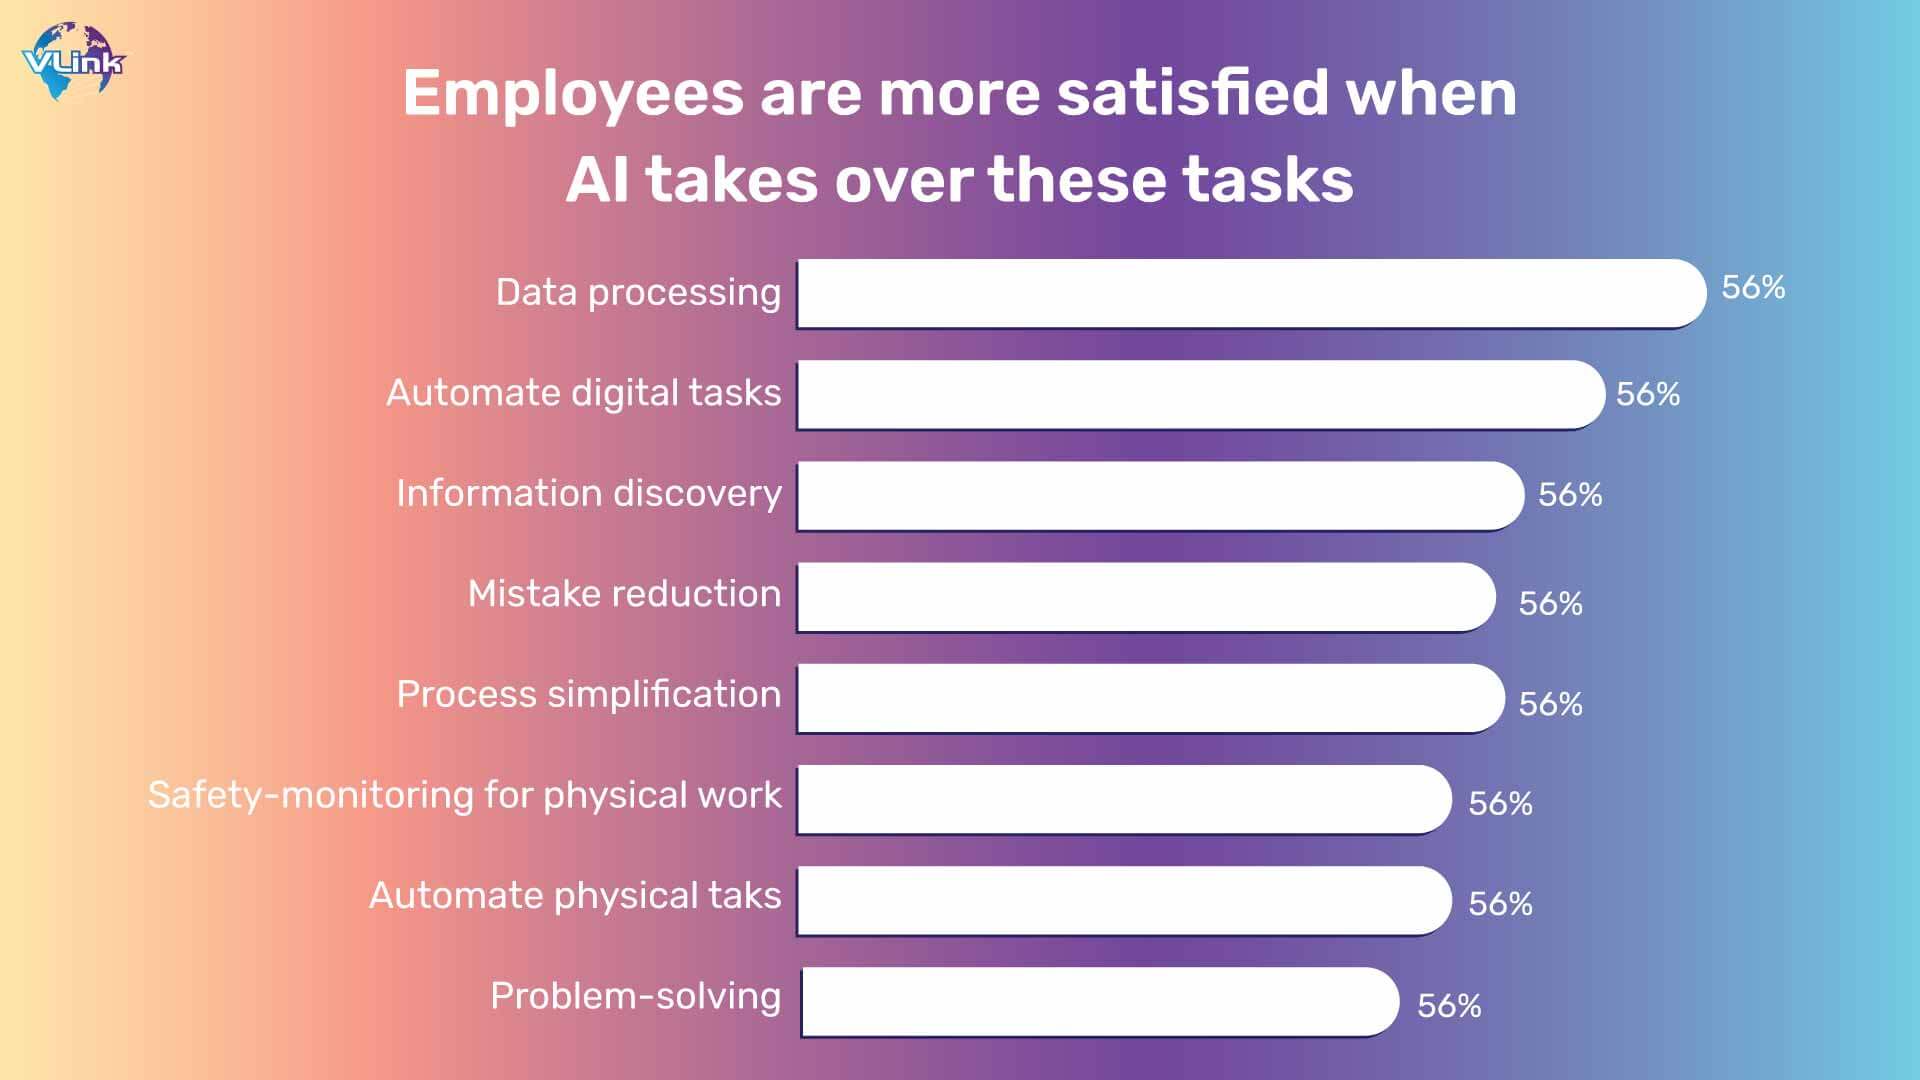 Employees are more satisfied when AI takes over these tasks